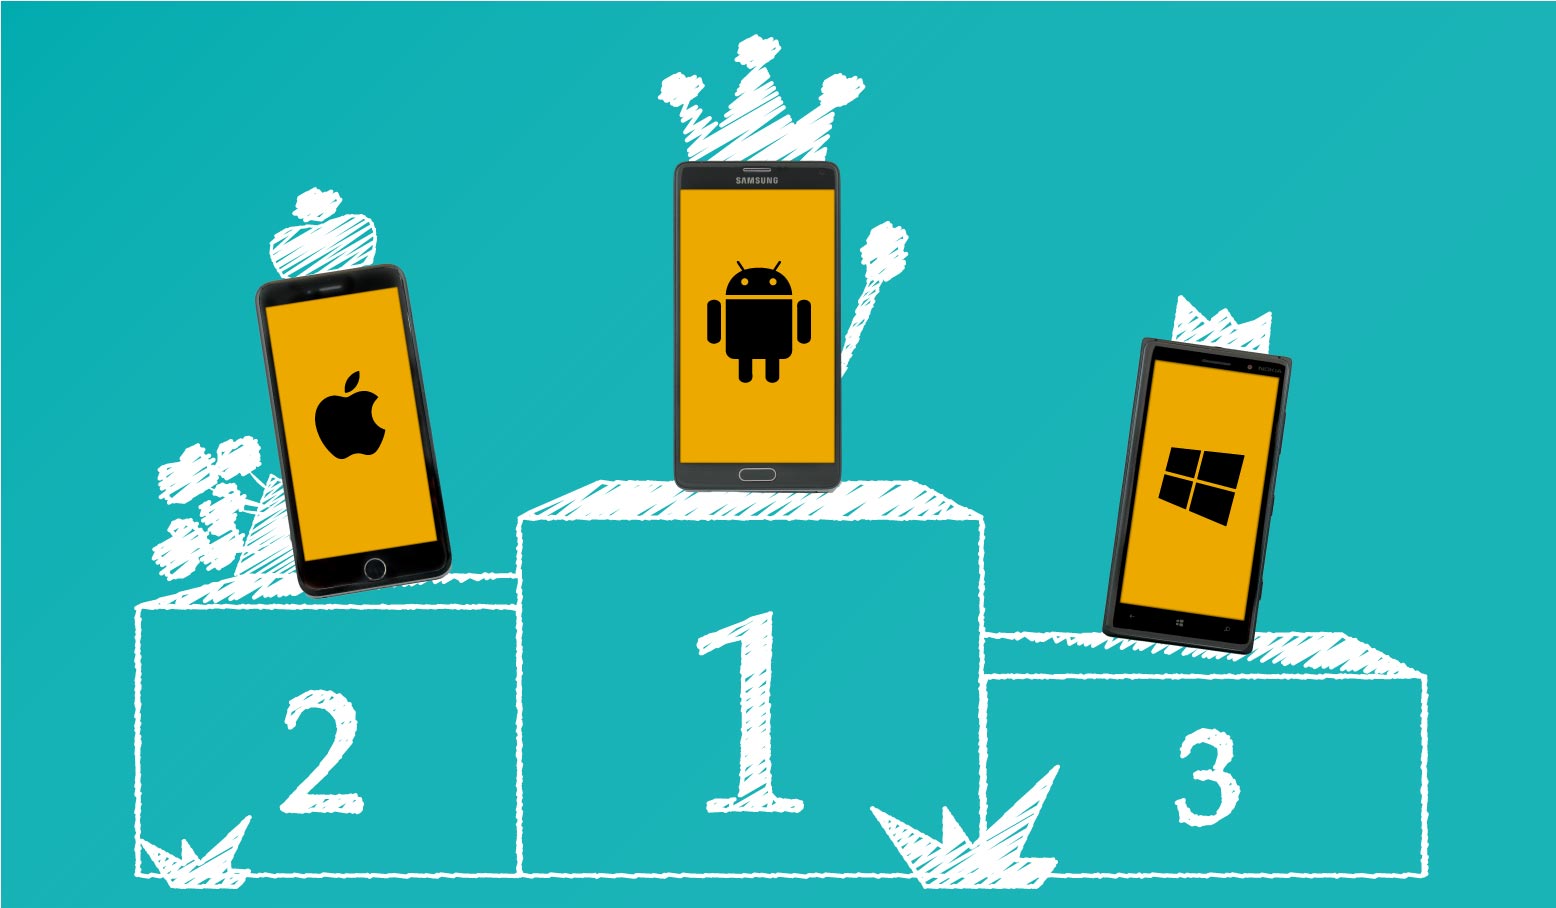 awards podium with Apple, Android and Microsoft phones